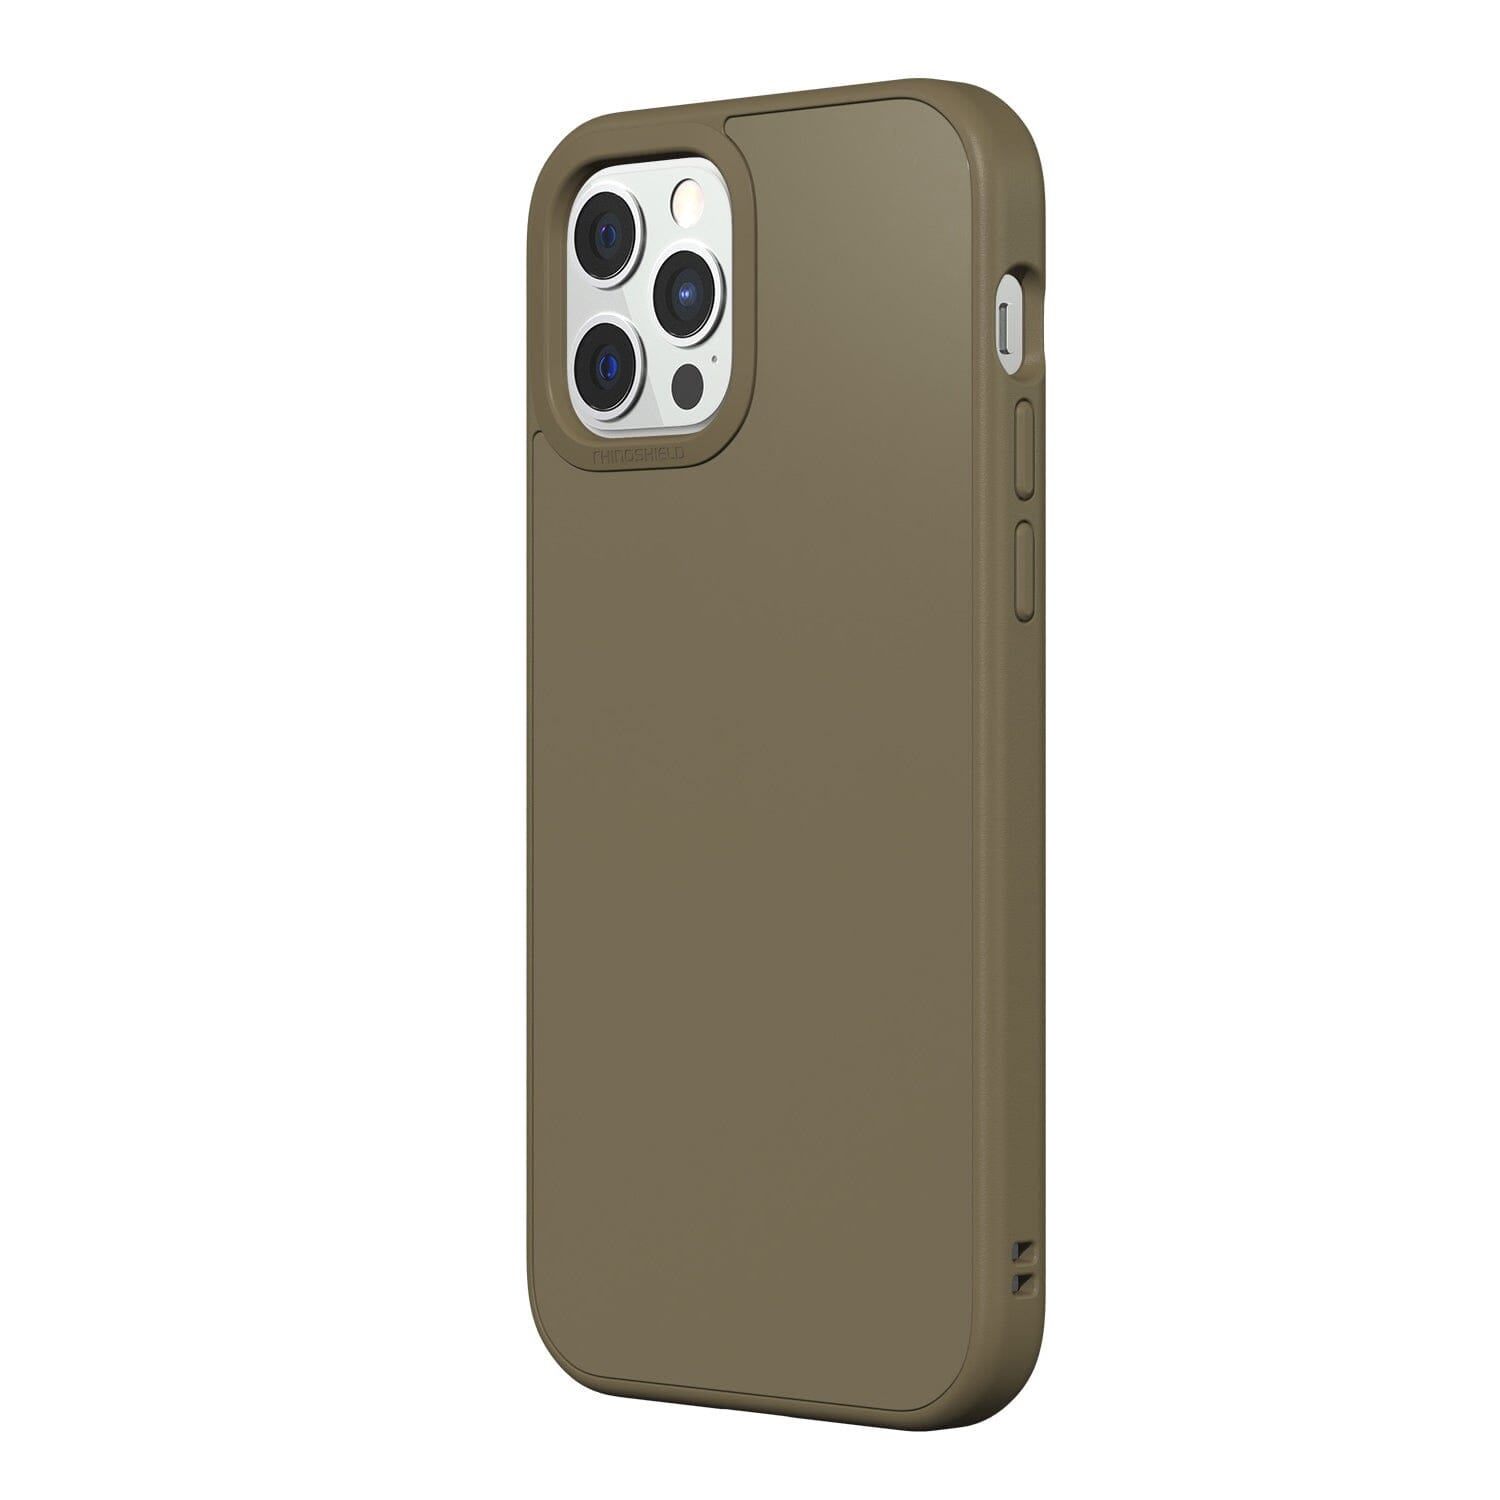 RhinoShield SolidSuit Protective Case with Premium Finish for iPhone 12 Series (2020) iPhone 12 Series RhinoShield iPhone 12 Pro Max 6.7" Classic Clay 